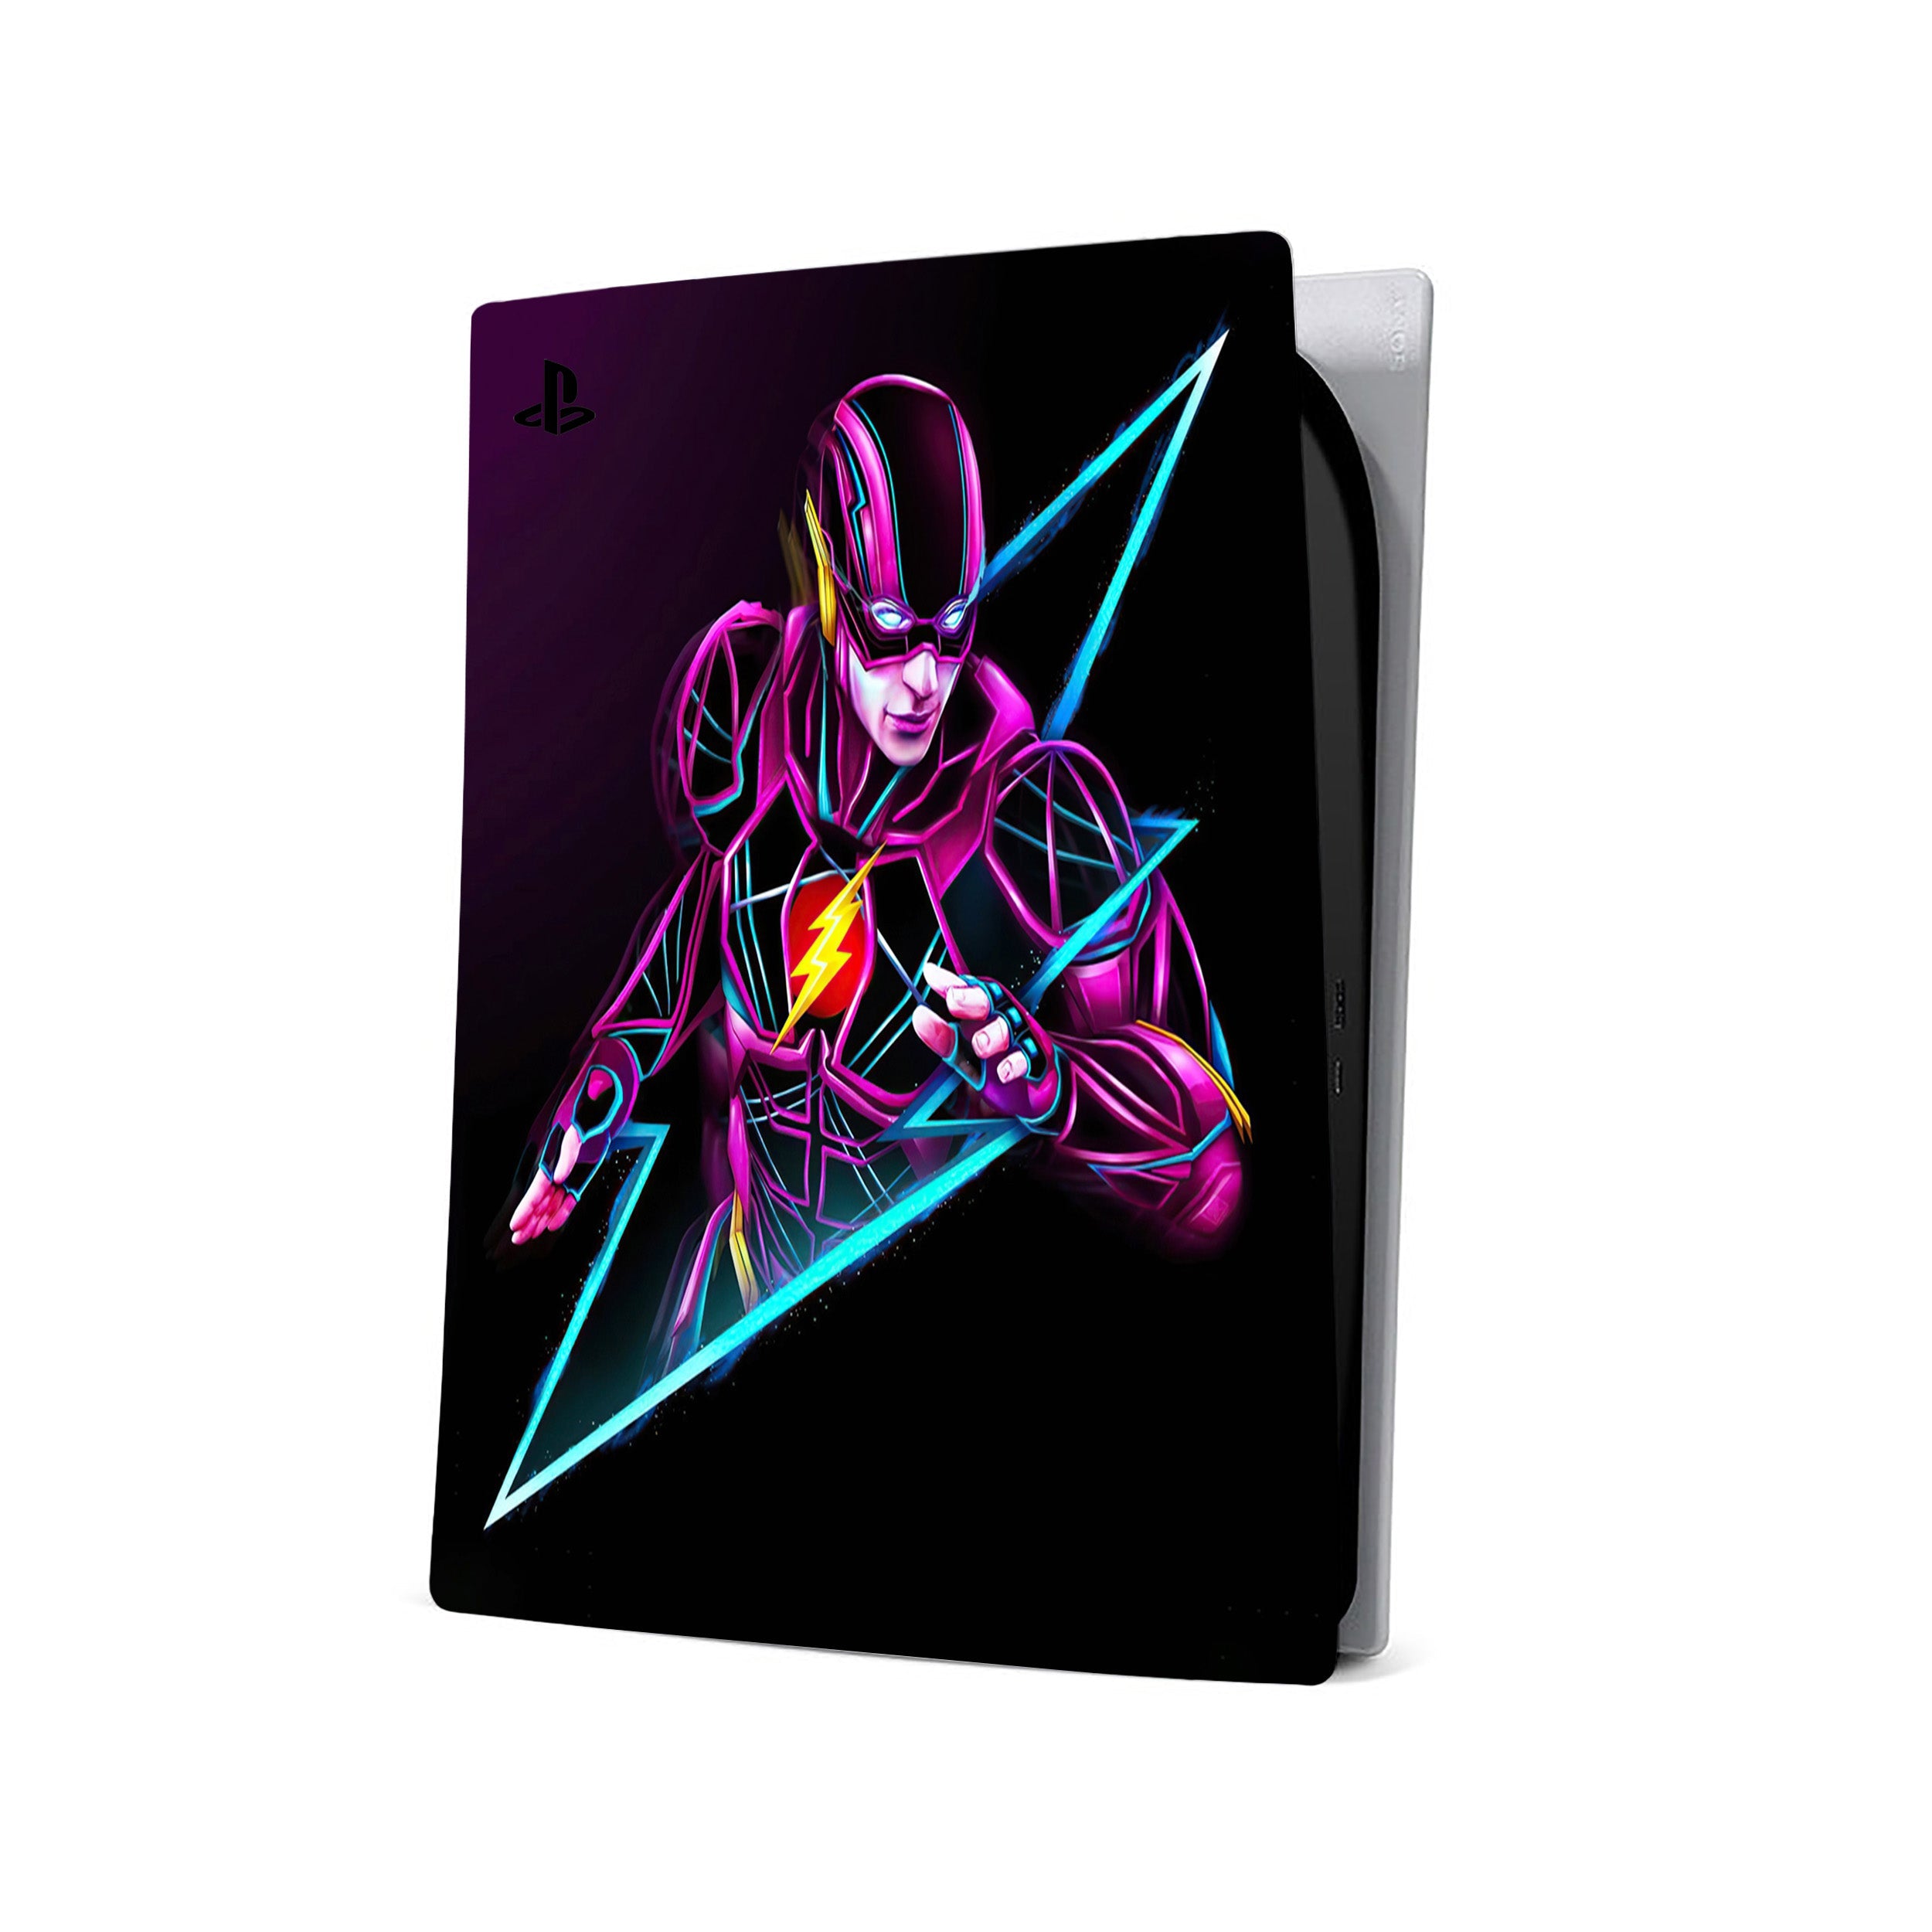 A video game skin featuring a DC Comics Flash design for the PS5.